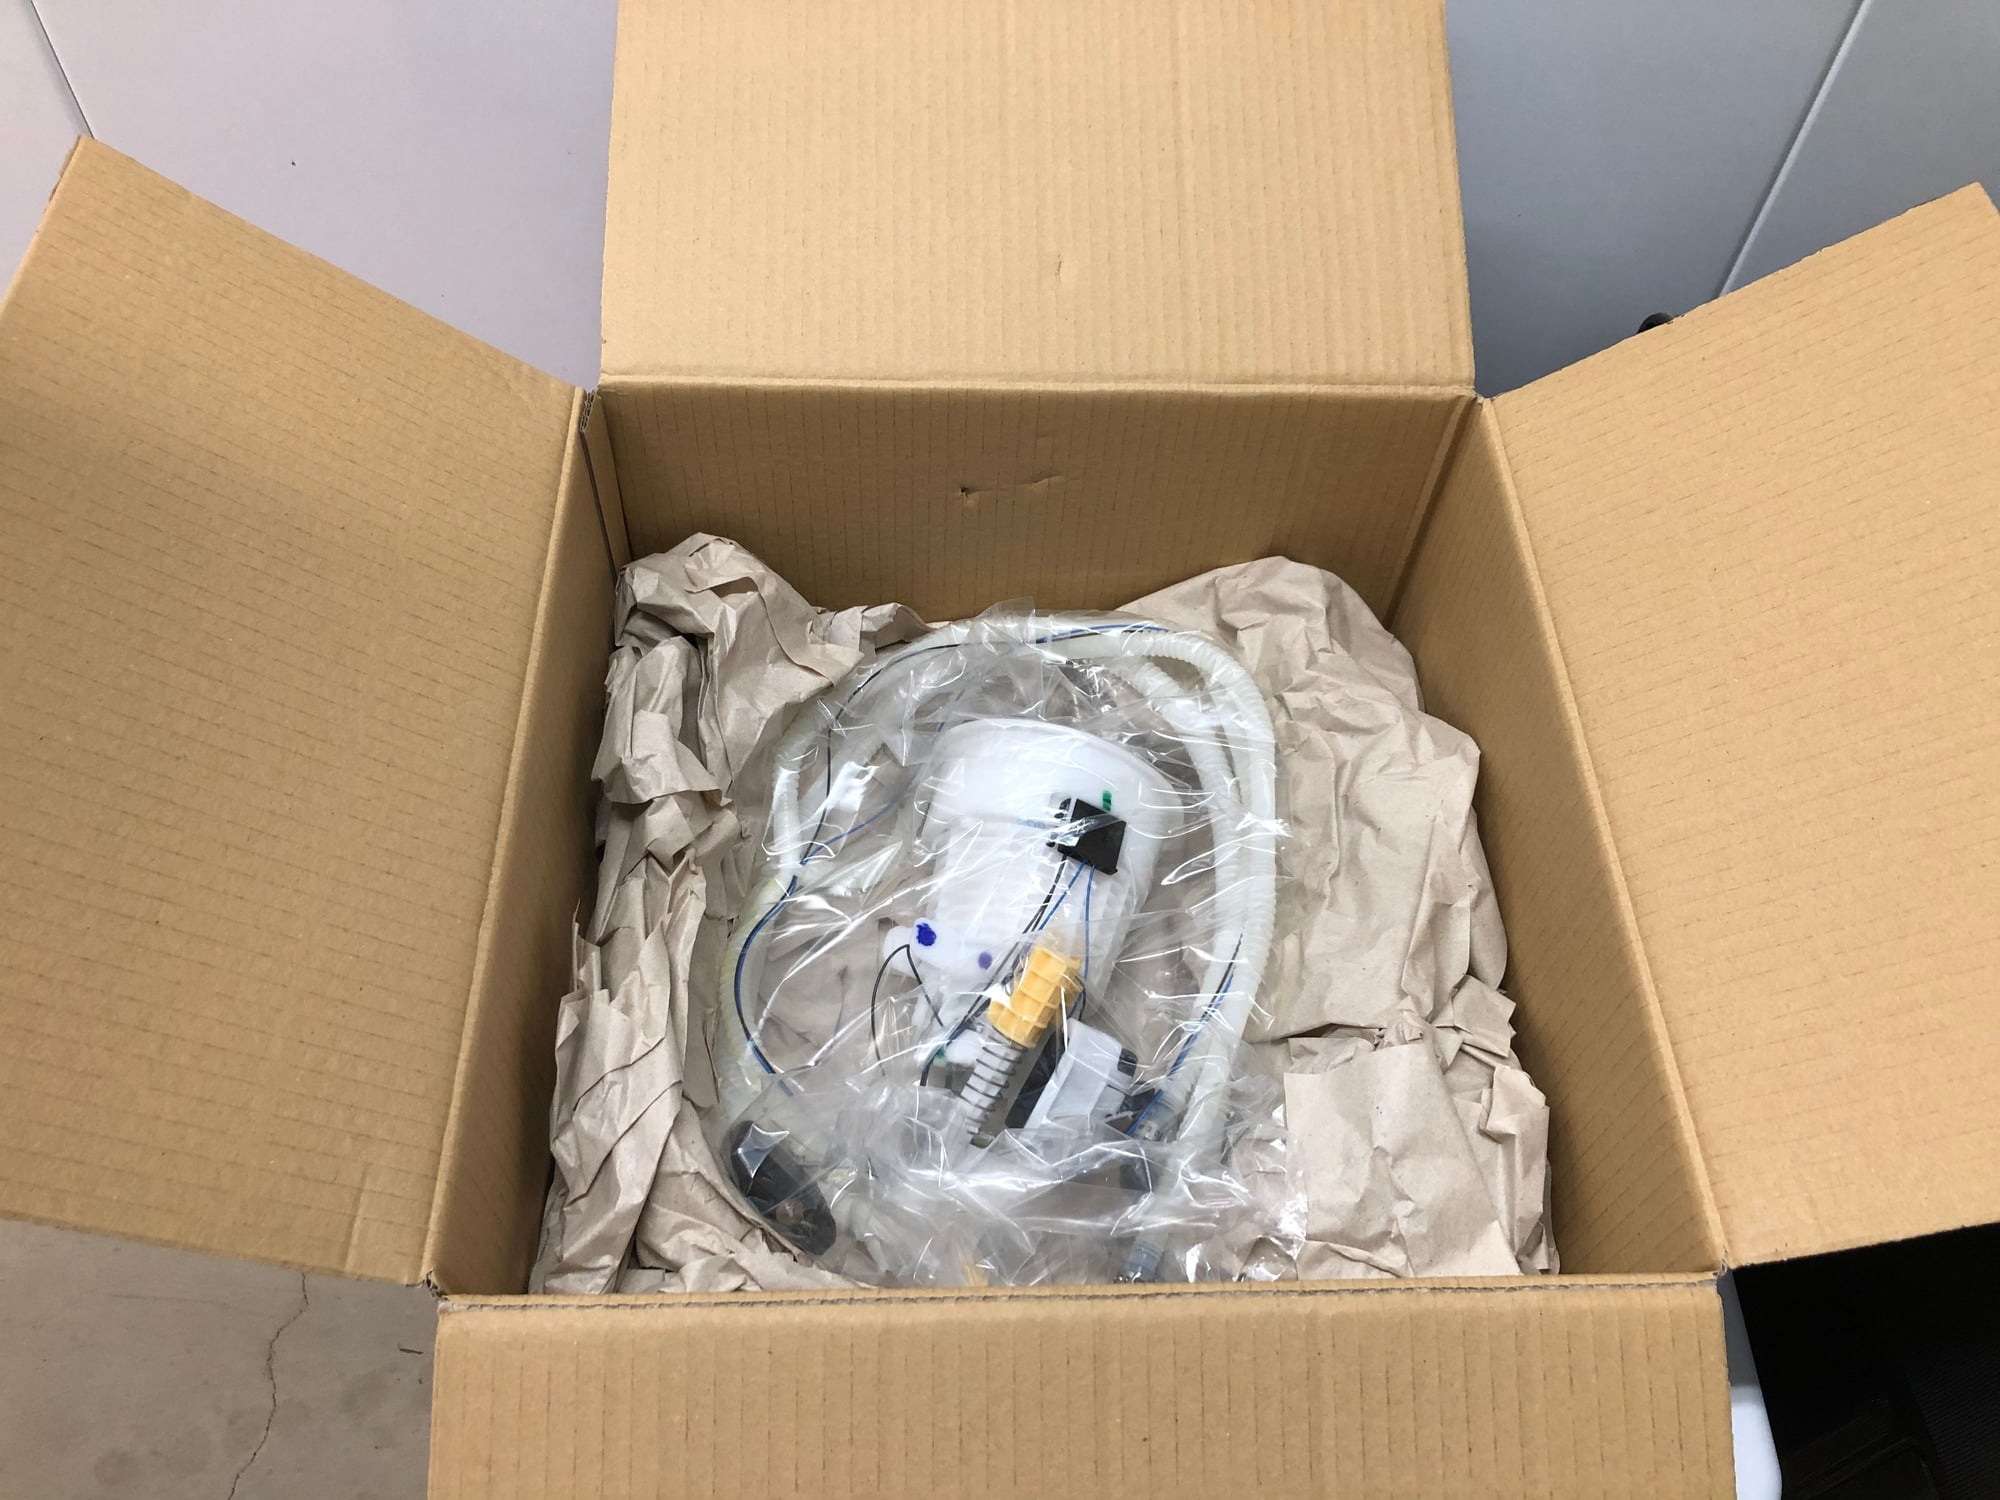 Engine - Intake/Fuel - W211 E63 AMG Fuel Pump - New In-Box - New - 2007 to 2011 Mercedes-Benz E63 AMG - Washington, DC 20001, United States